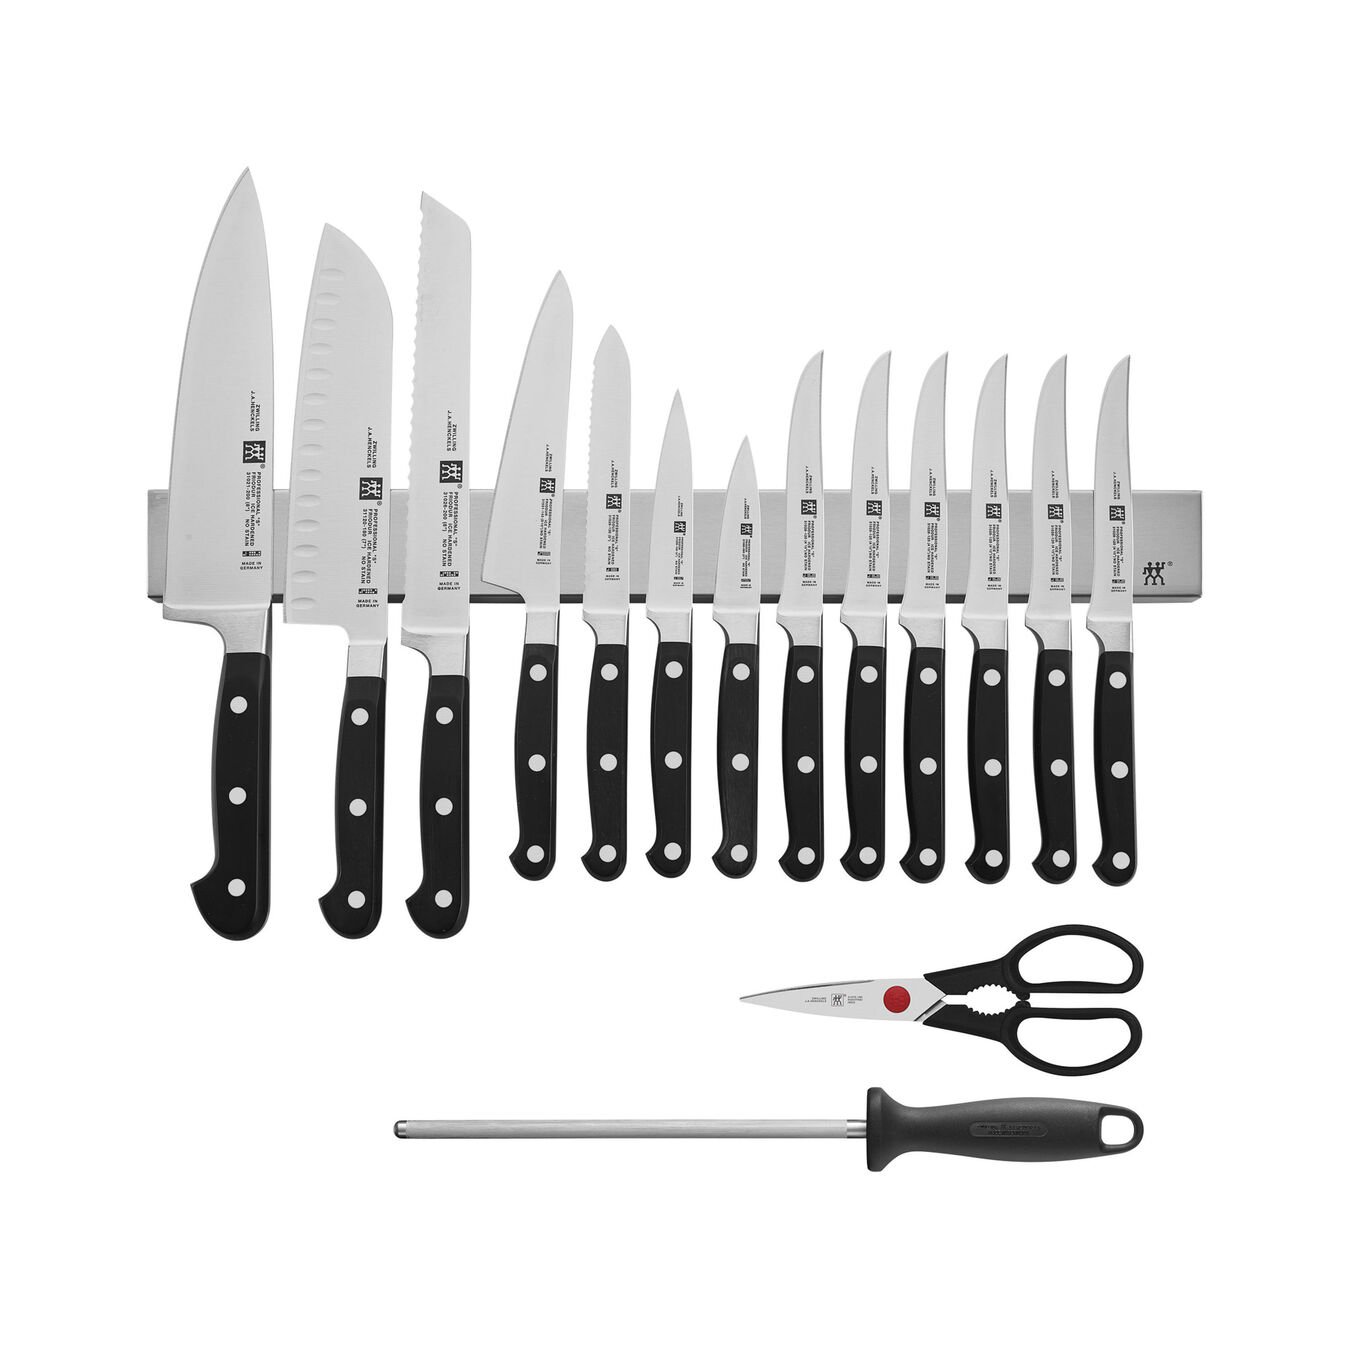 16-pc, Set with Stainless Magnetic Knife Bar,,large 1